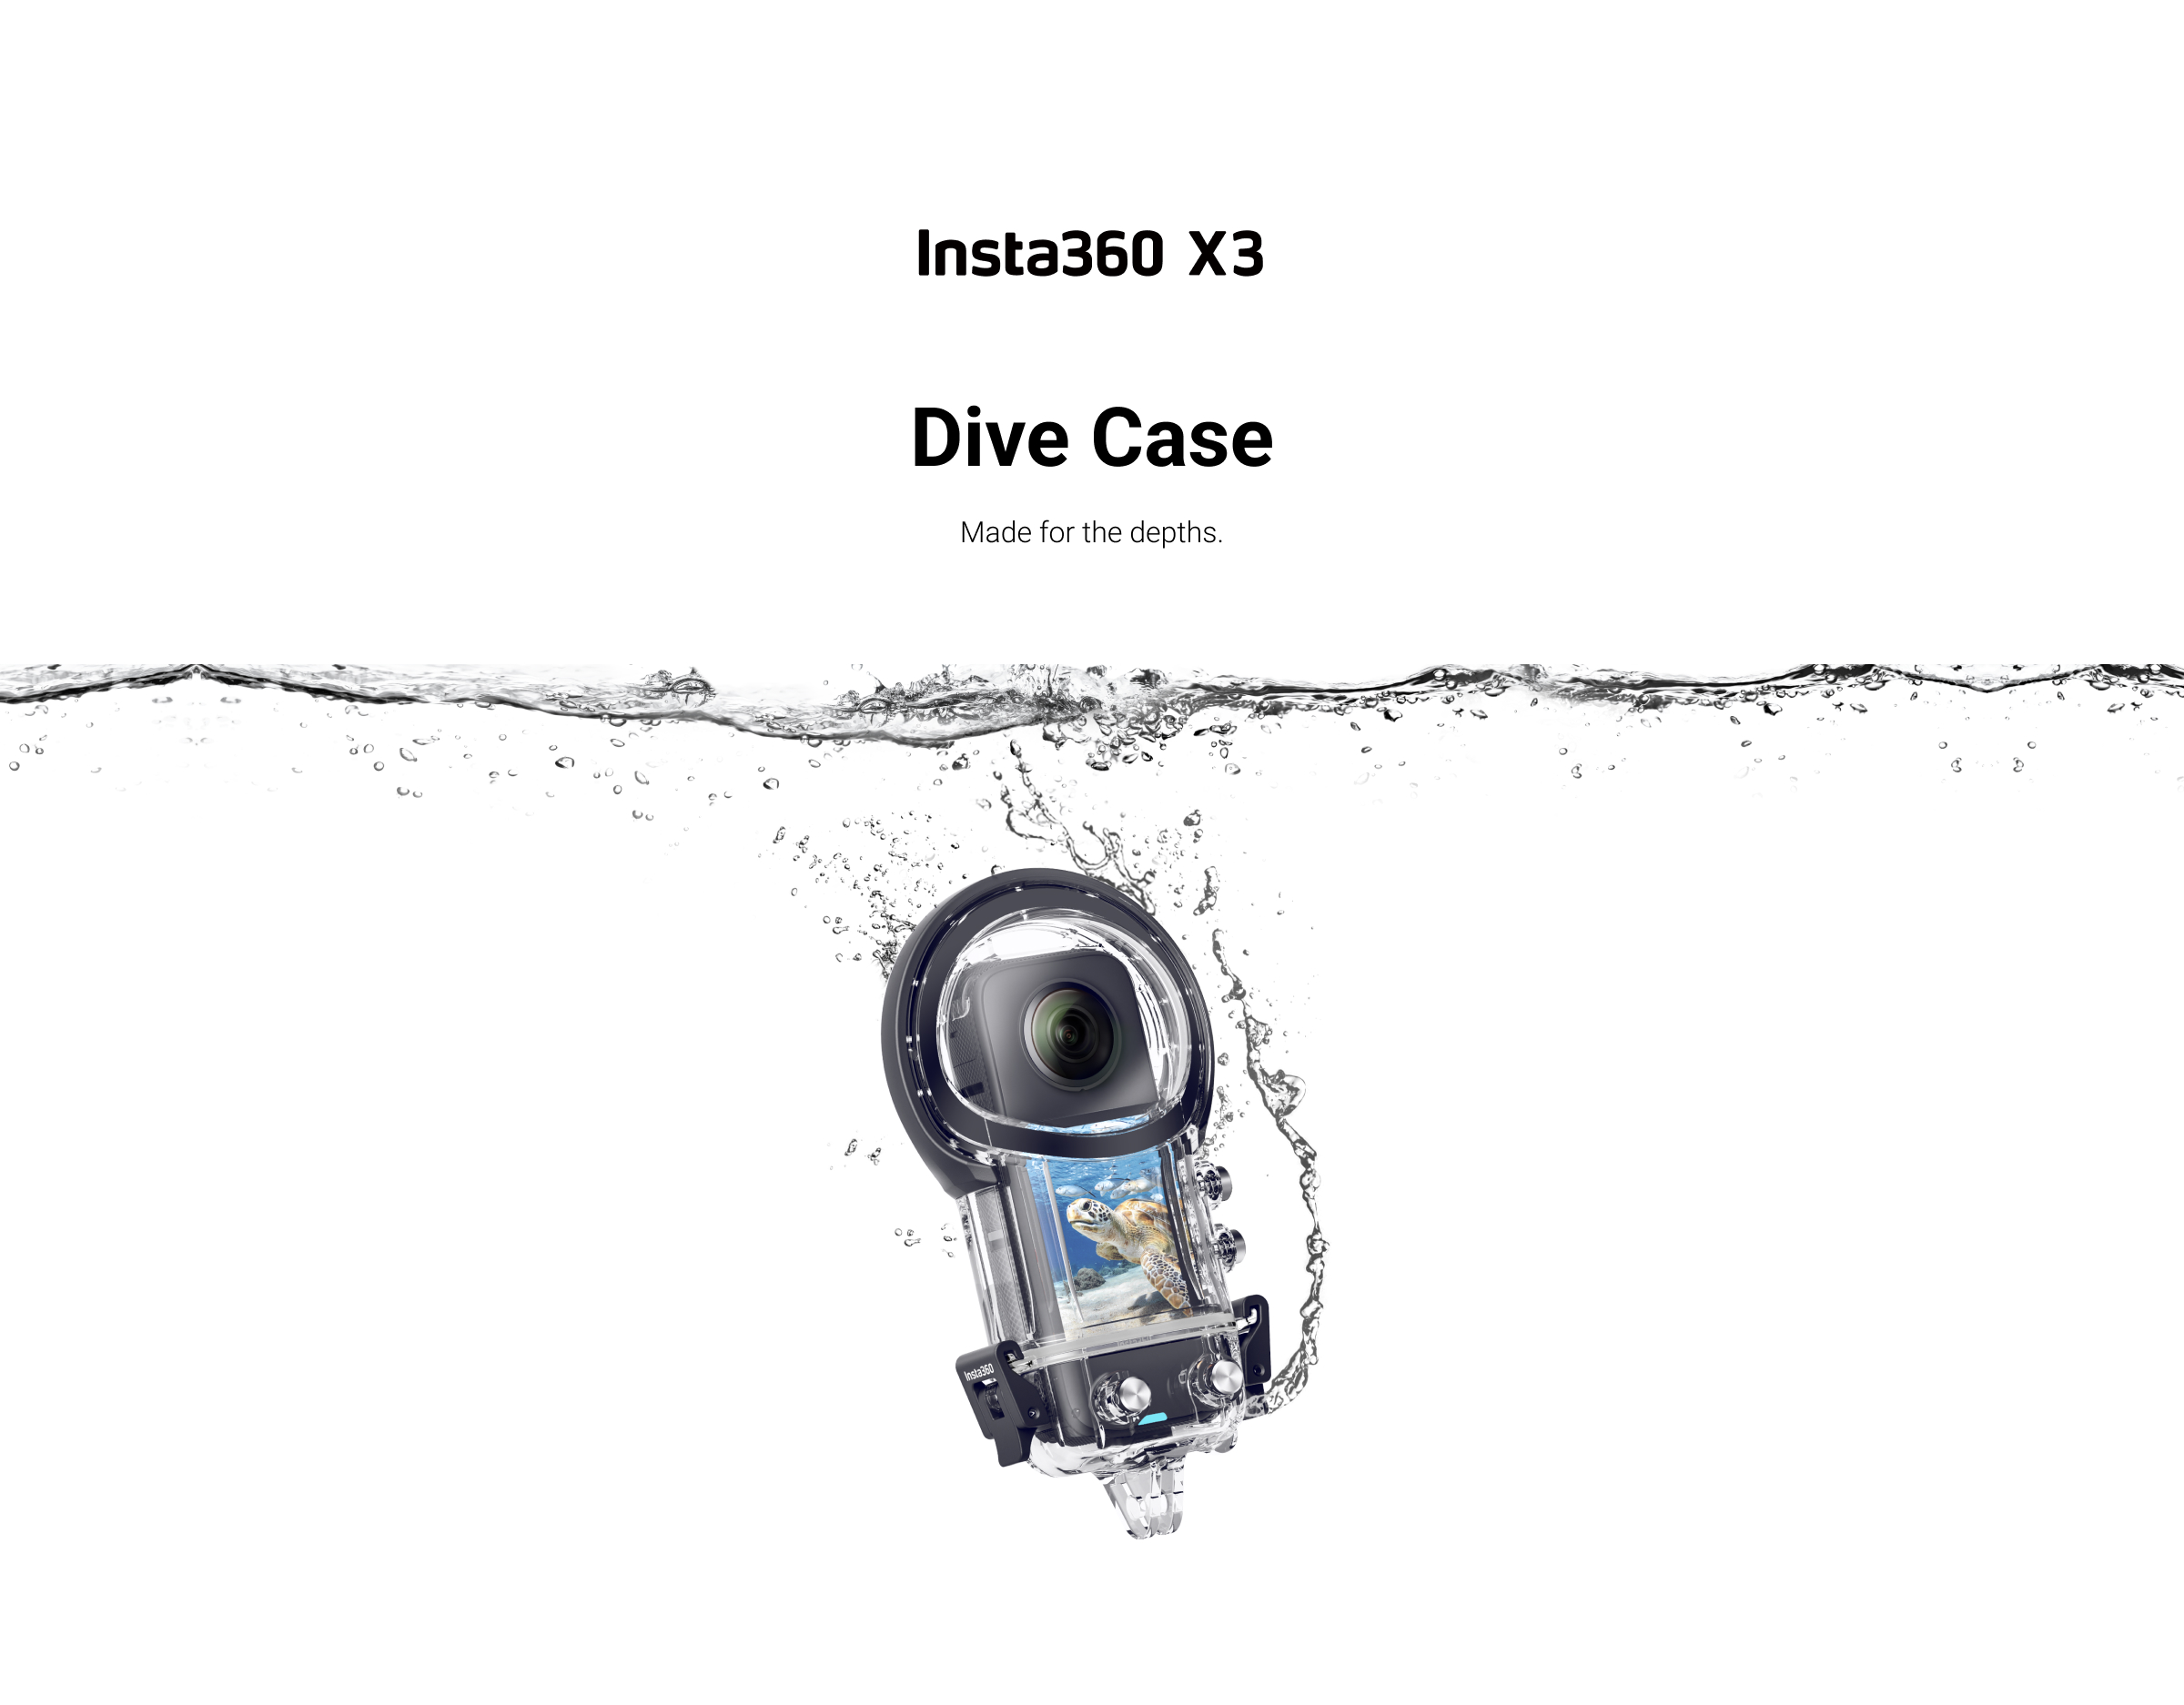 Insta360 X3 Dive Case - Made for depths